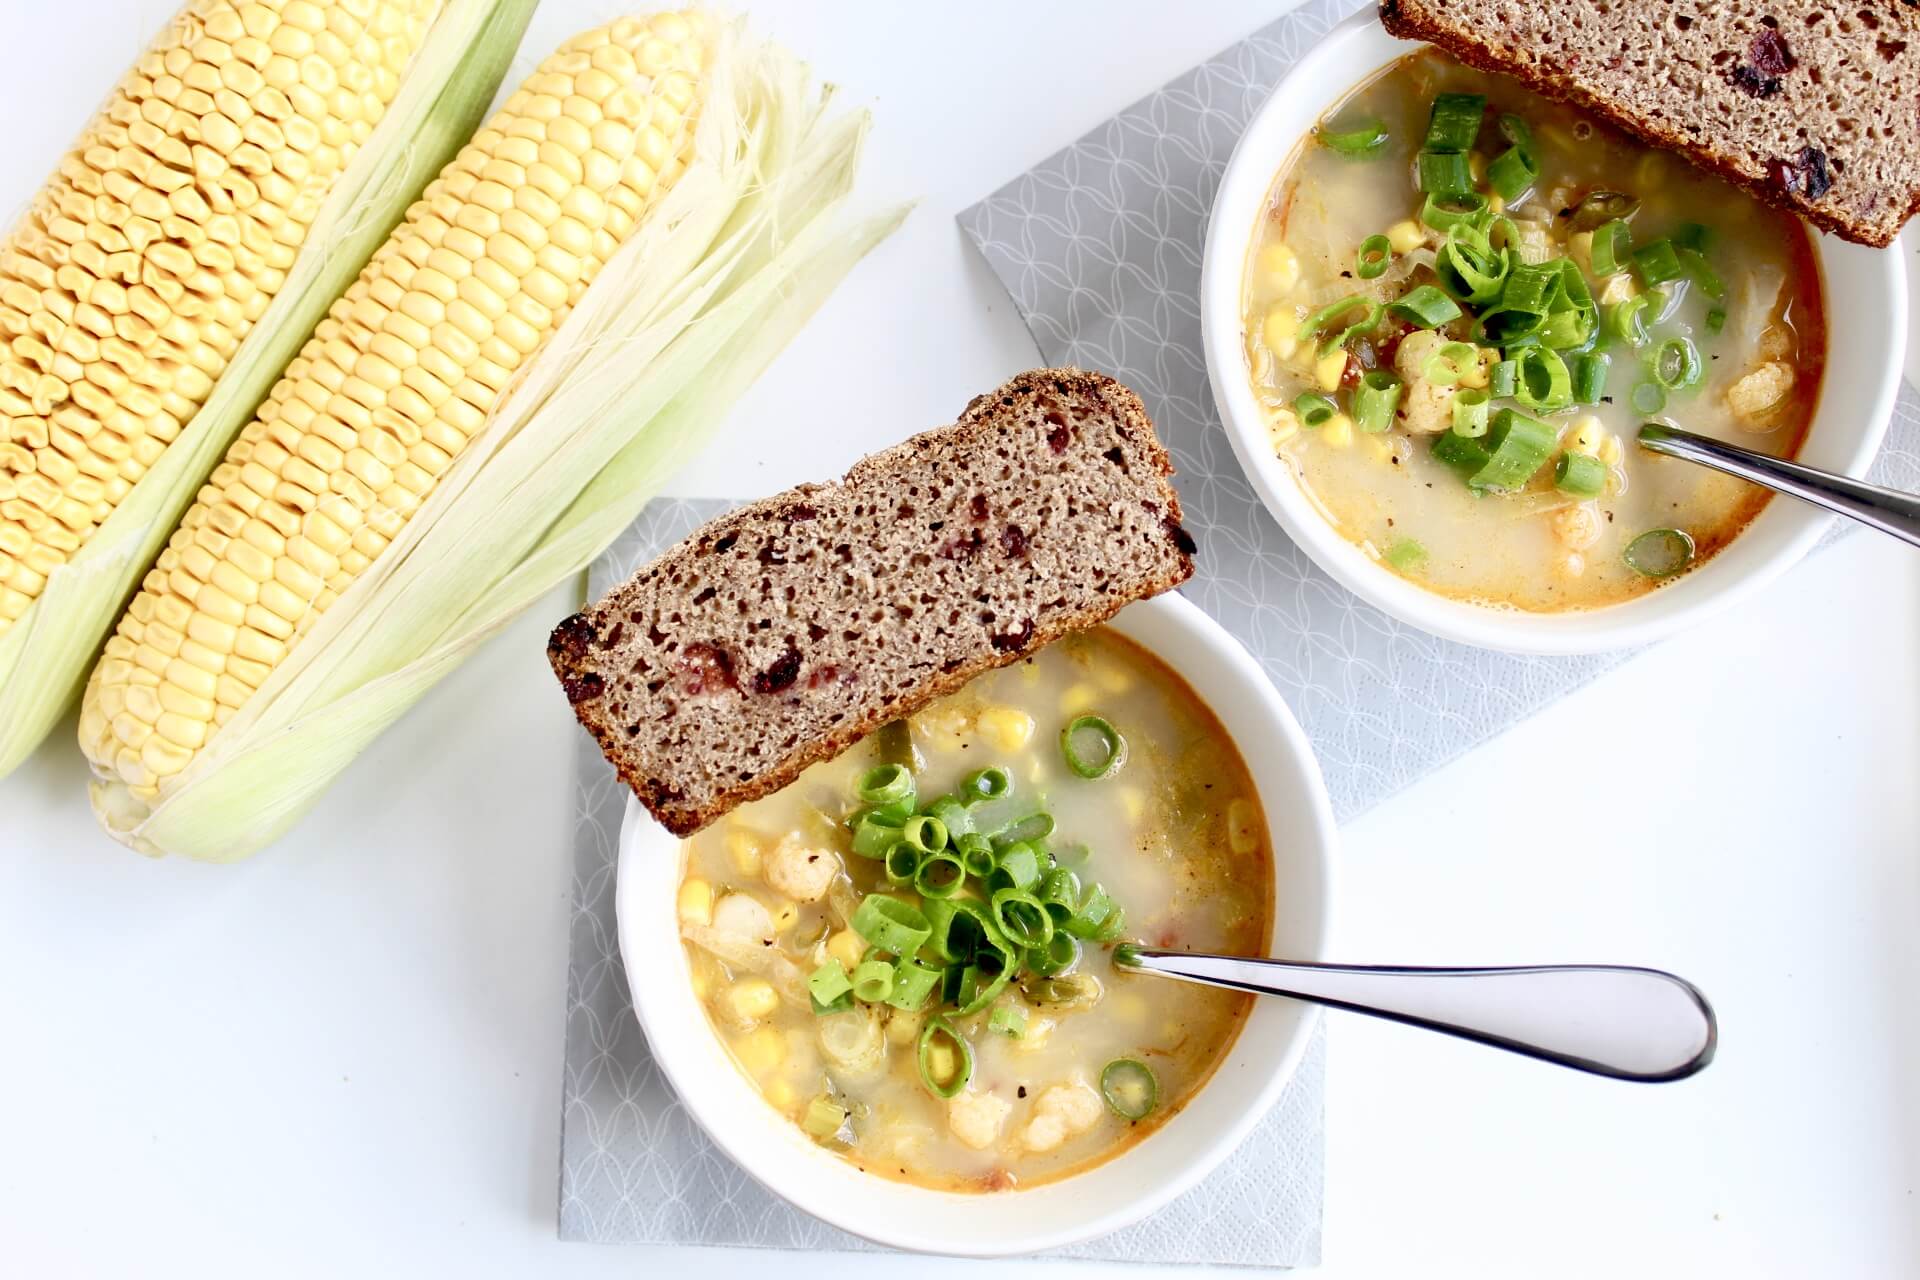 Vegan corn chowder with cauliflower and chili - Easy summer meal